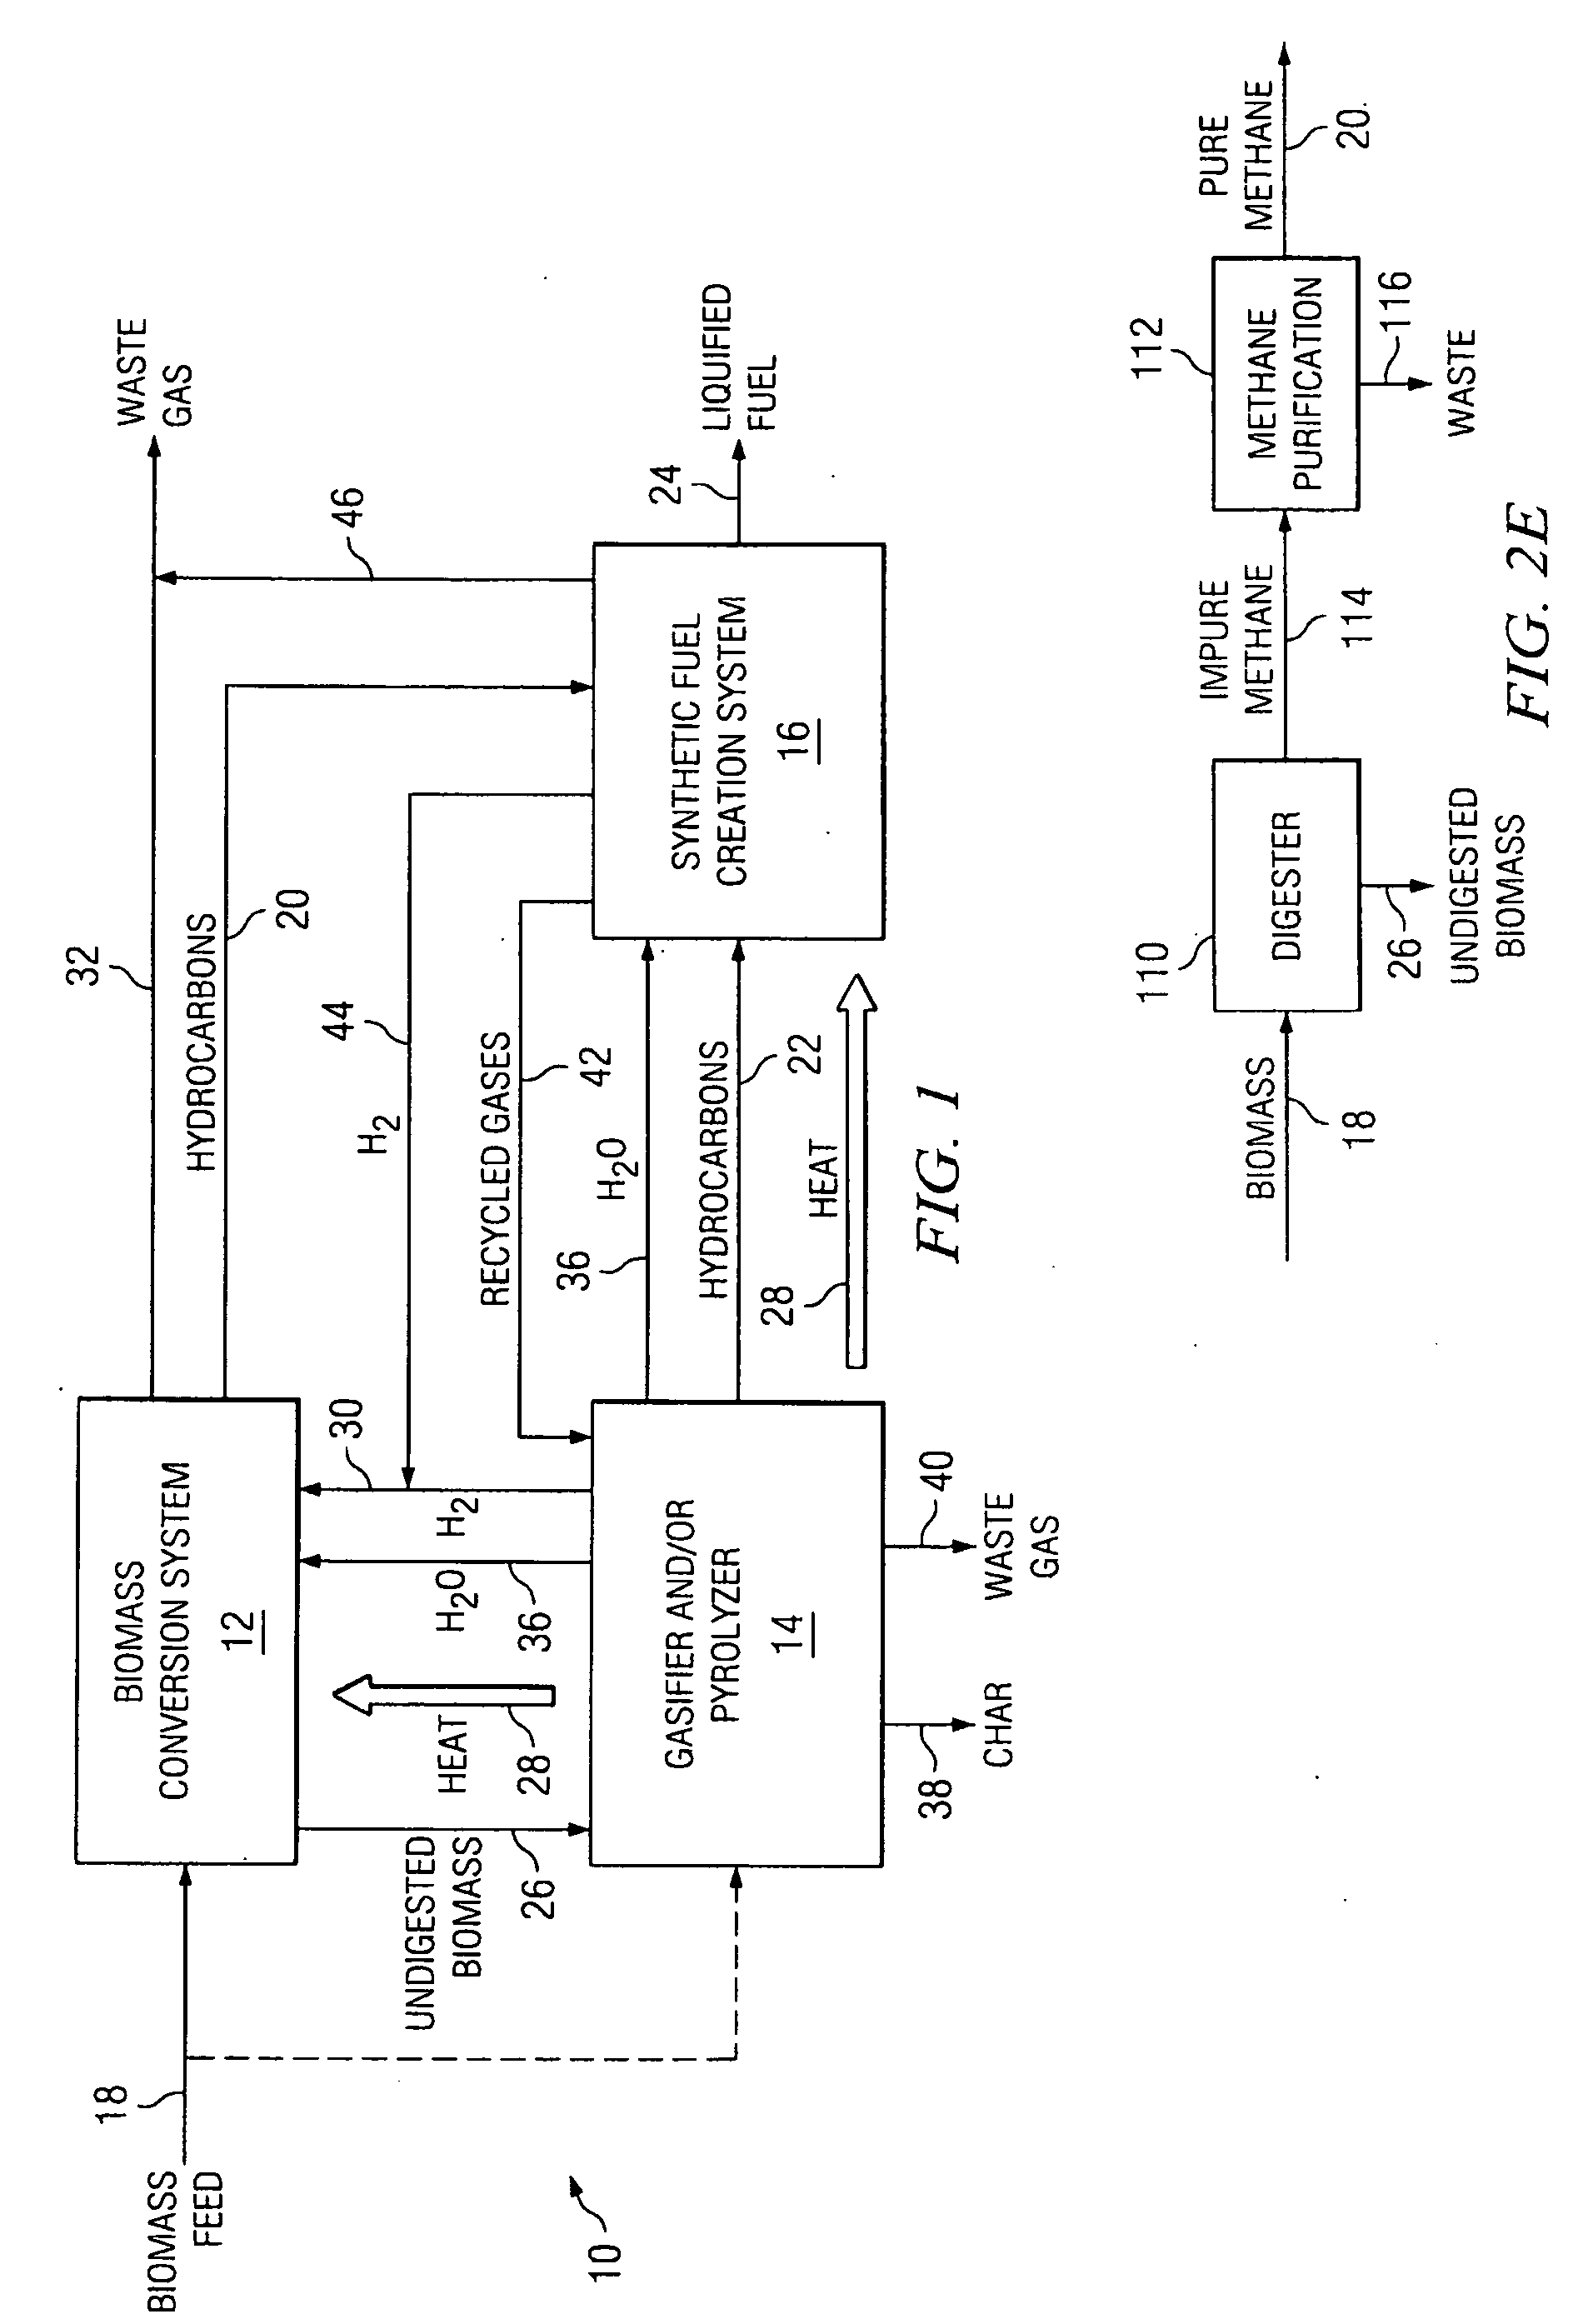 Integrated Biofuel Production System